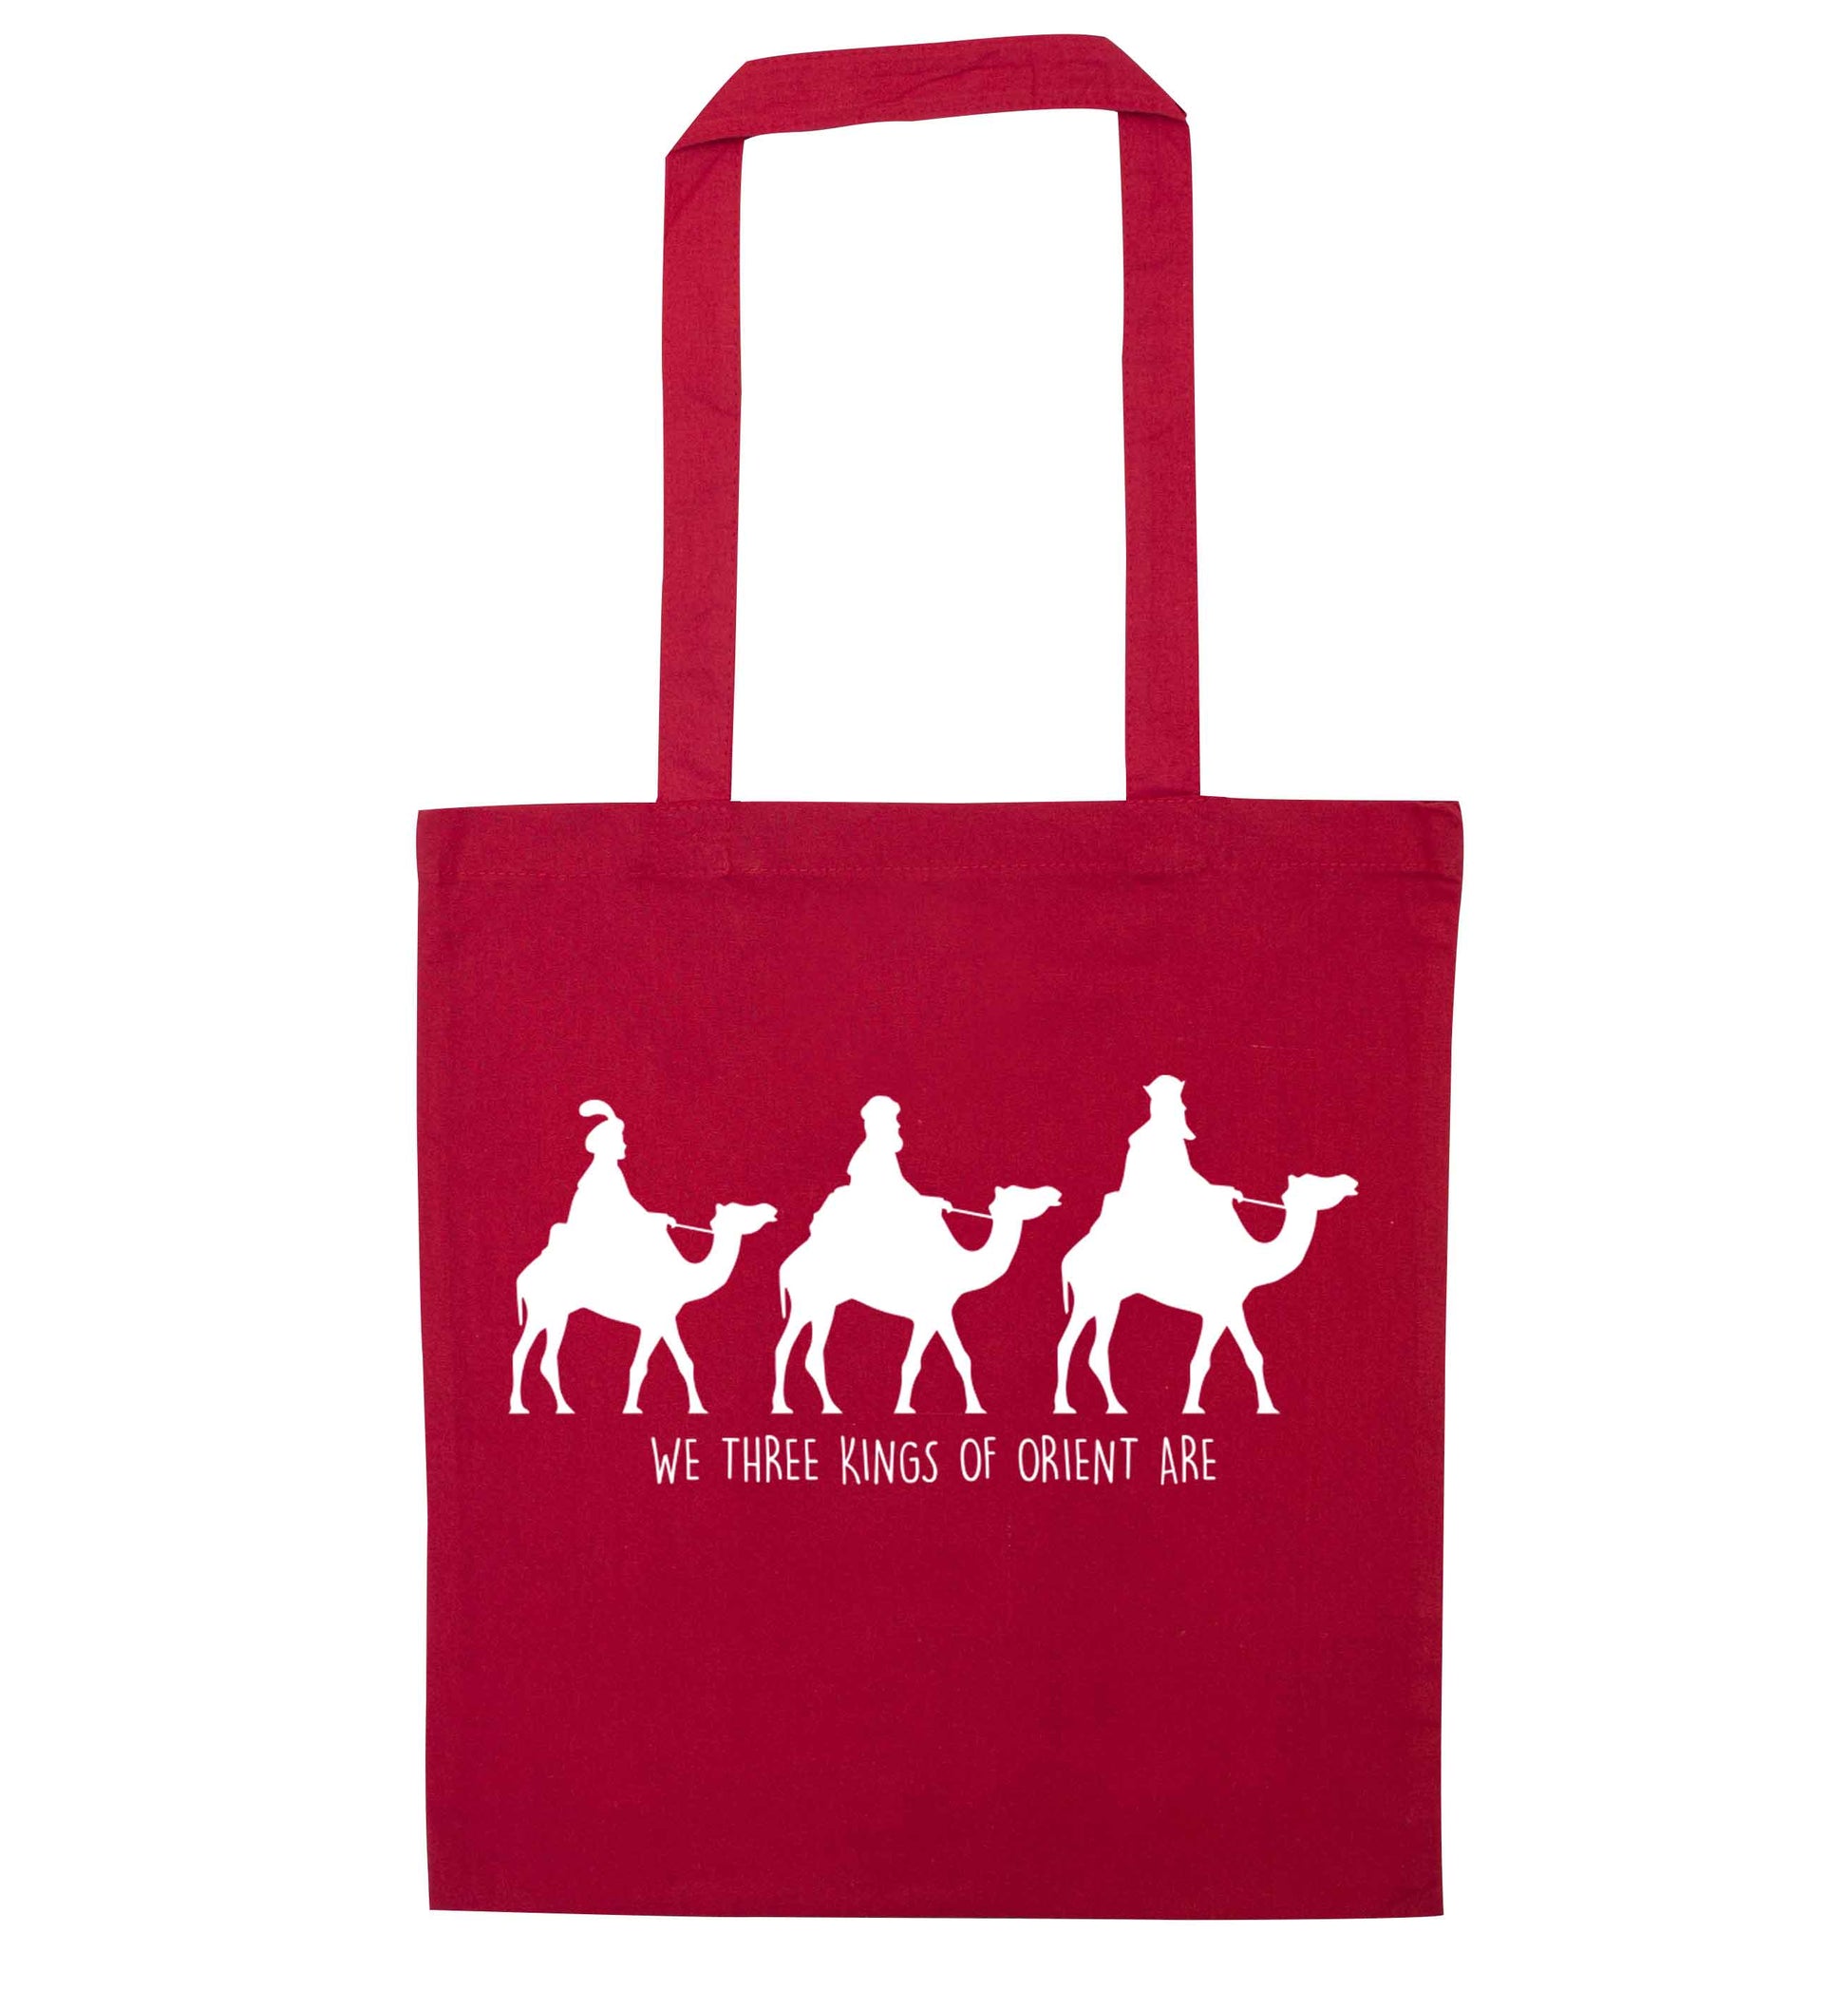 We three kings of orient are red tote bag